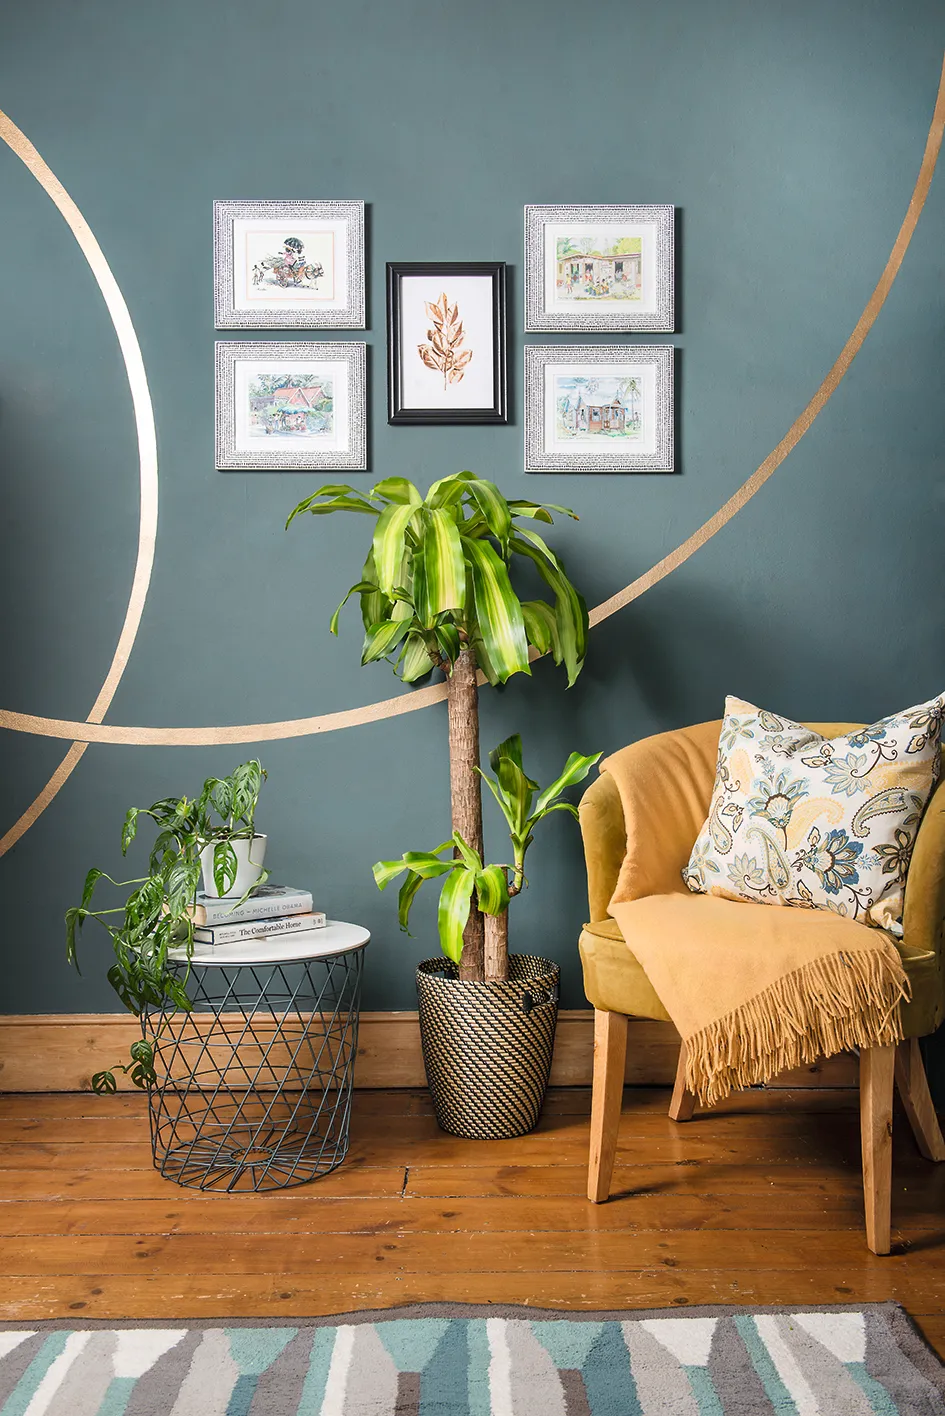 The elegant gold curves of Camellia’s feature wall draw the eye to her picture gallery and houseplants. The colourful prints by artist Jill Walker show scenes from Barbados, where Camellia has relatives